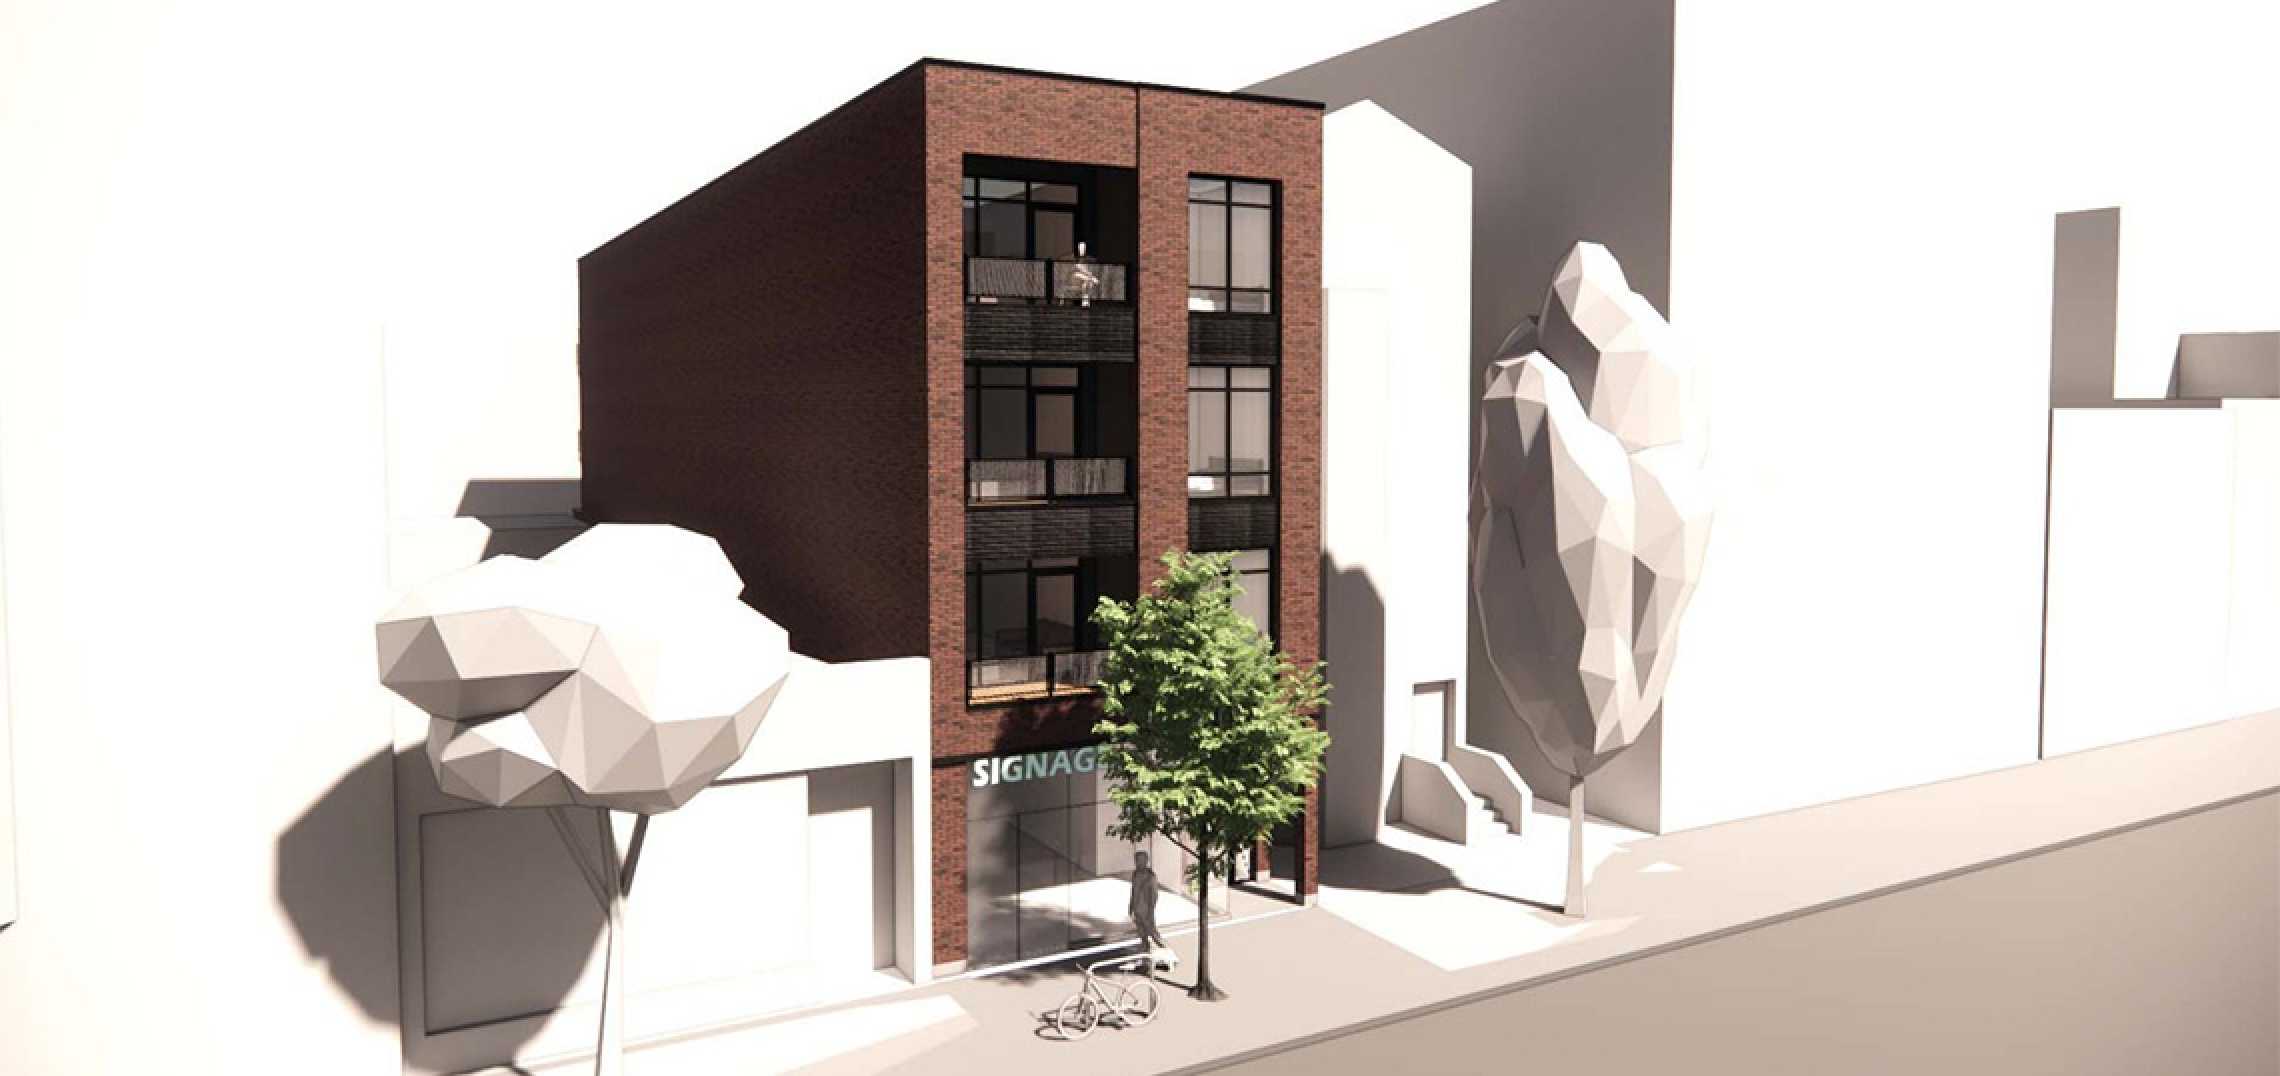 Permit issued for 3355 N. Southport The mixed-use project will have 6 units and retail space